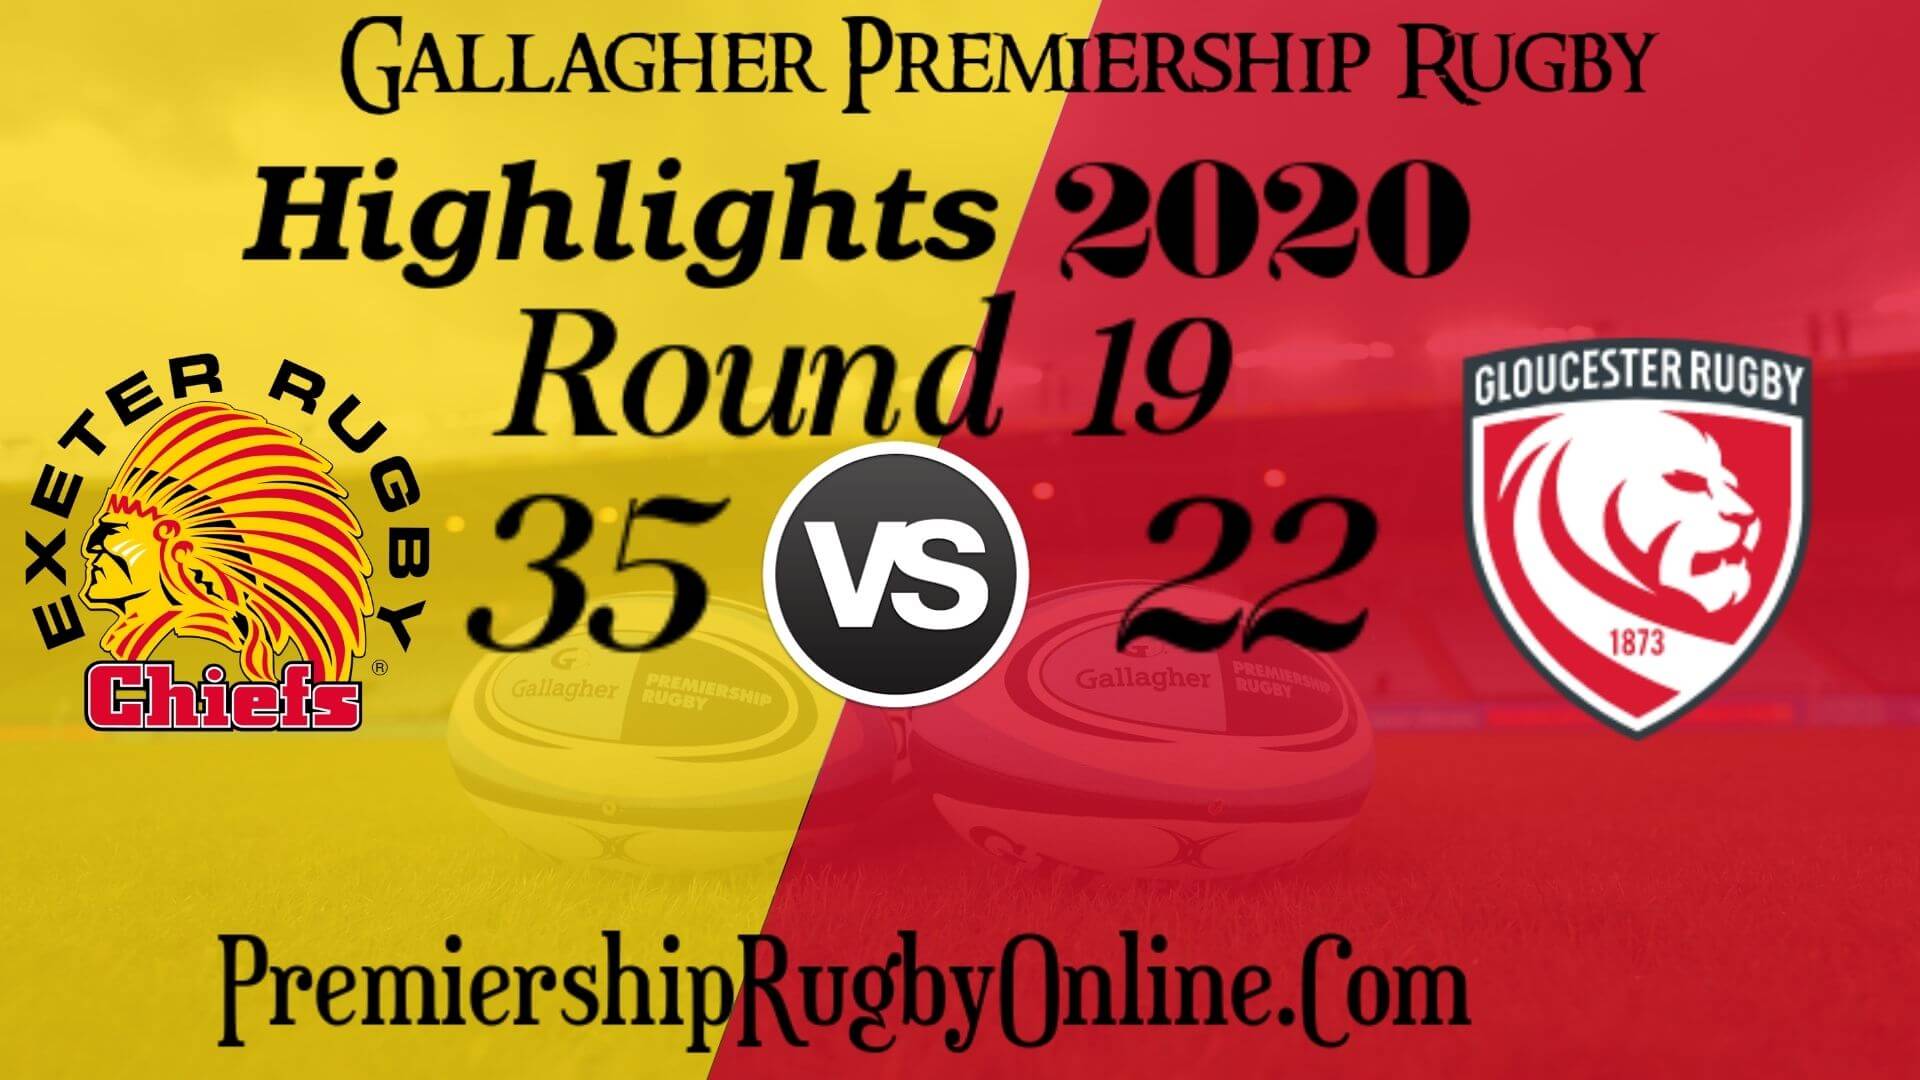 Exeter Chiefs vs Gloucester Rugby Highlights 2020 RD 19